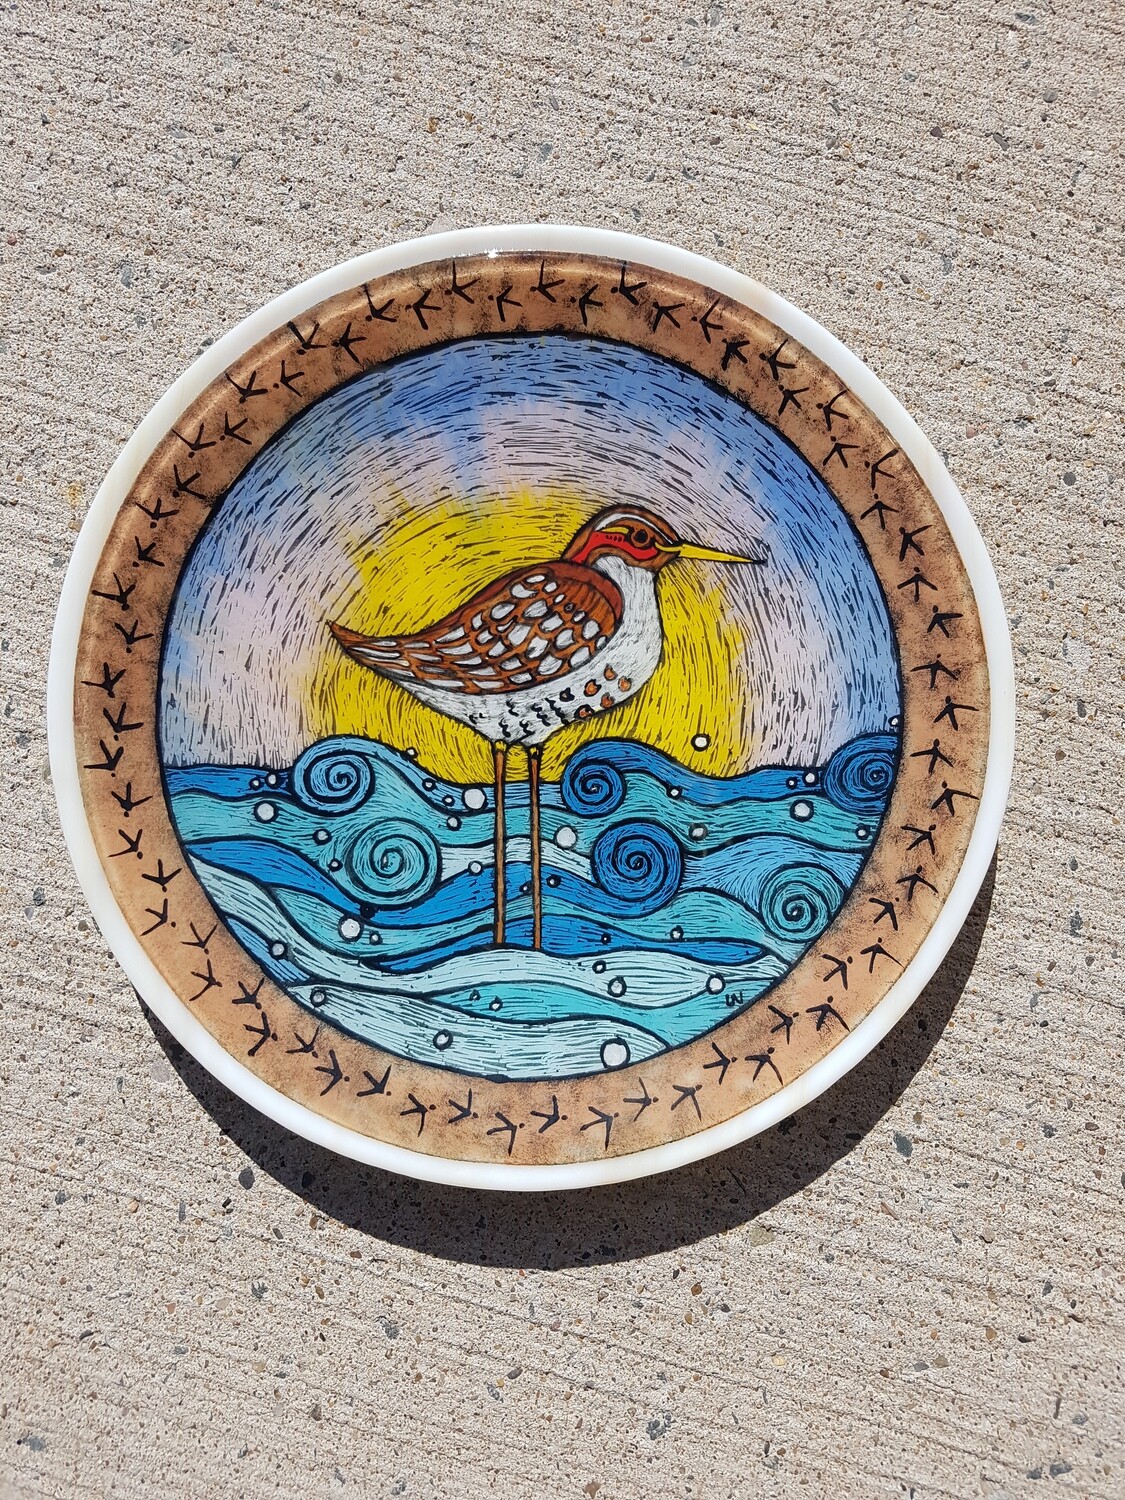 Sandpiper in the Waves, plate